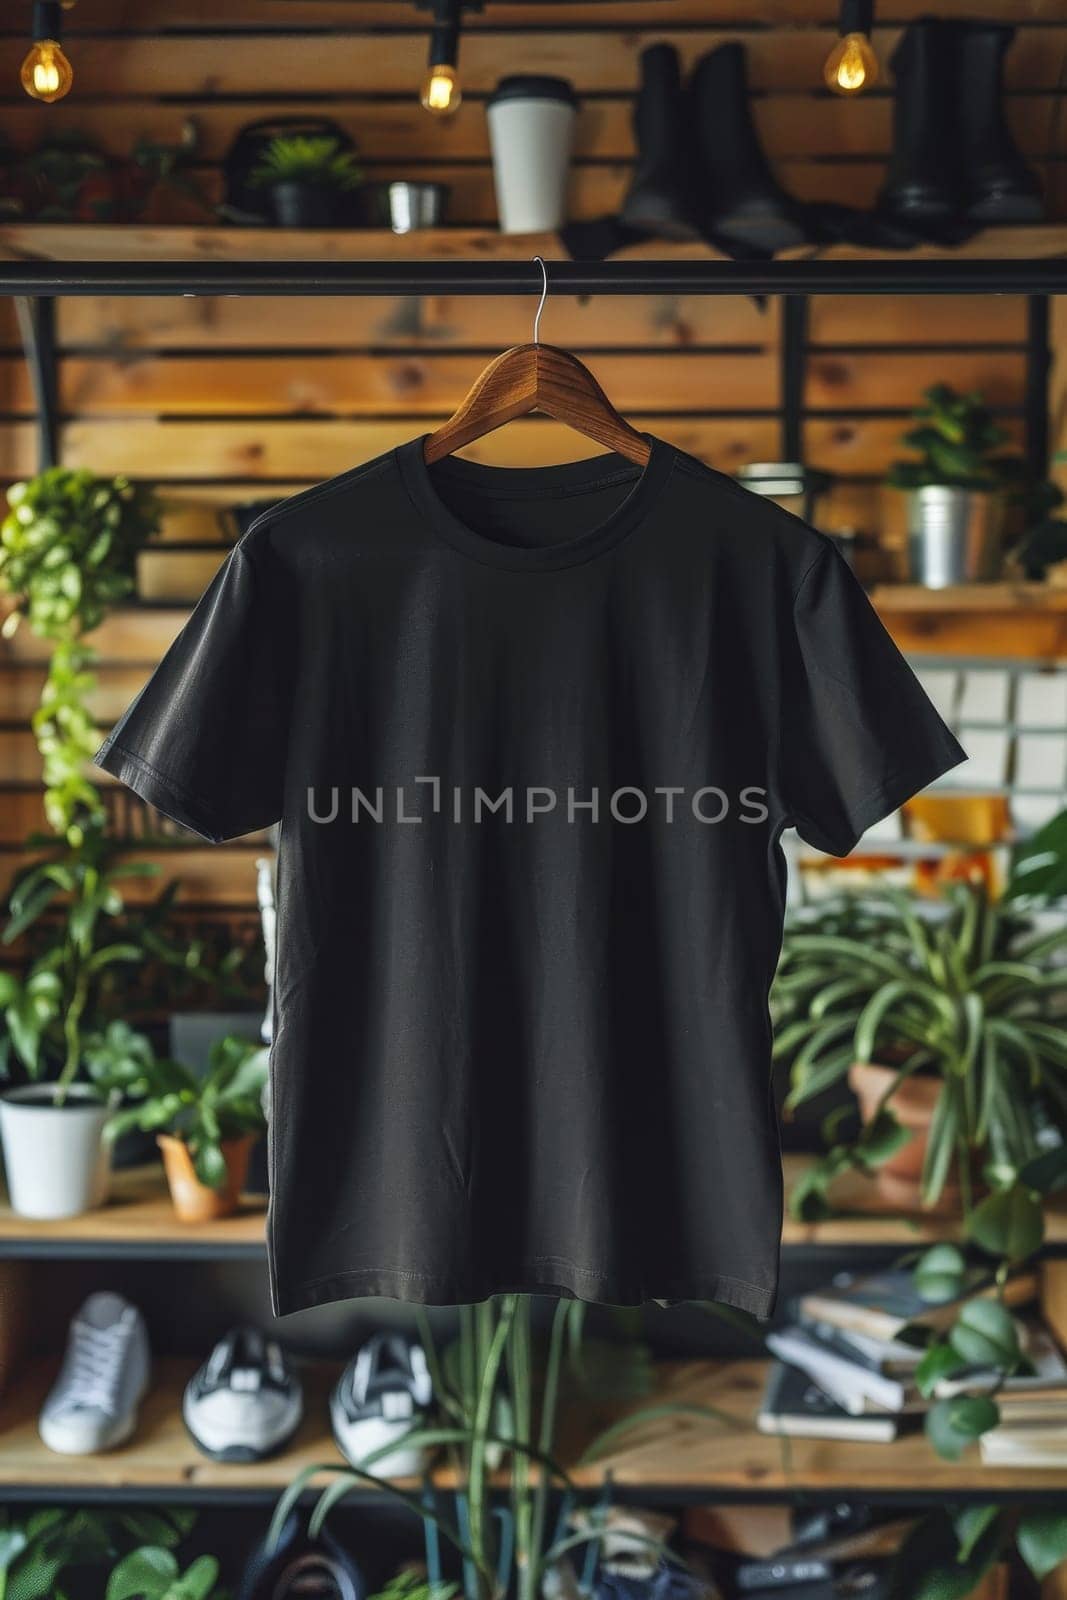 A black shirt hanging on a wooden hanger by itchaznong